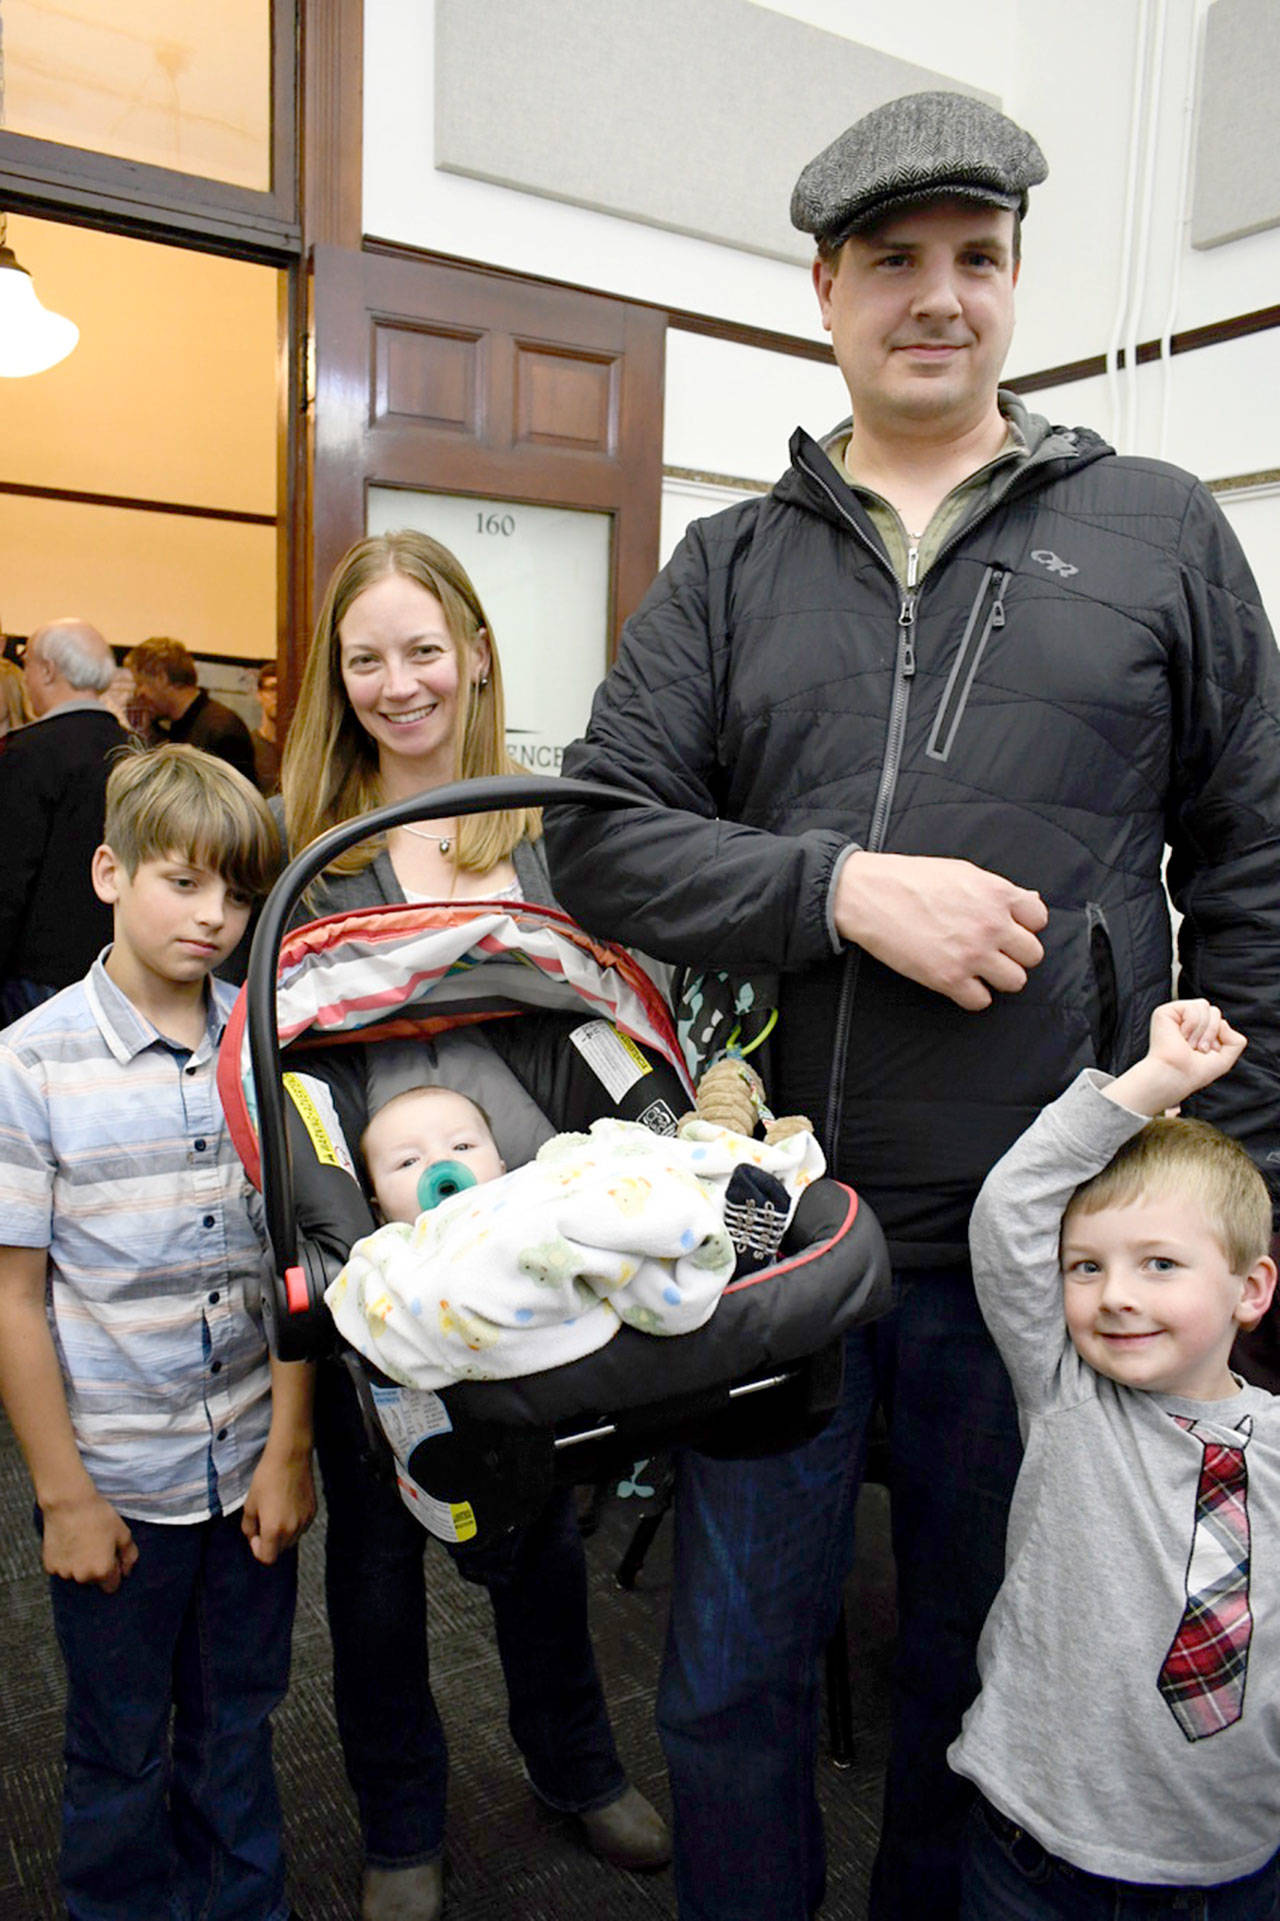 Jefferson County Prosecutor-elect James Kennedy, his wife Krystal and three sons — Sol, left, baby Miles and Collin, were present at the Jefferson County Courthouse on Tuesday night to learn he had defeated incumbent Michael Haas. (Jeannie McMacken/Peninsula Daily News)